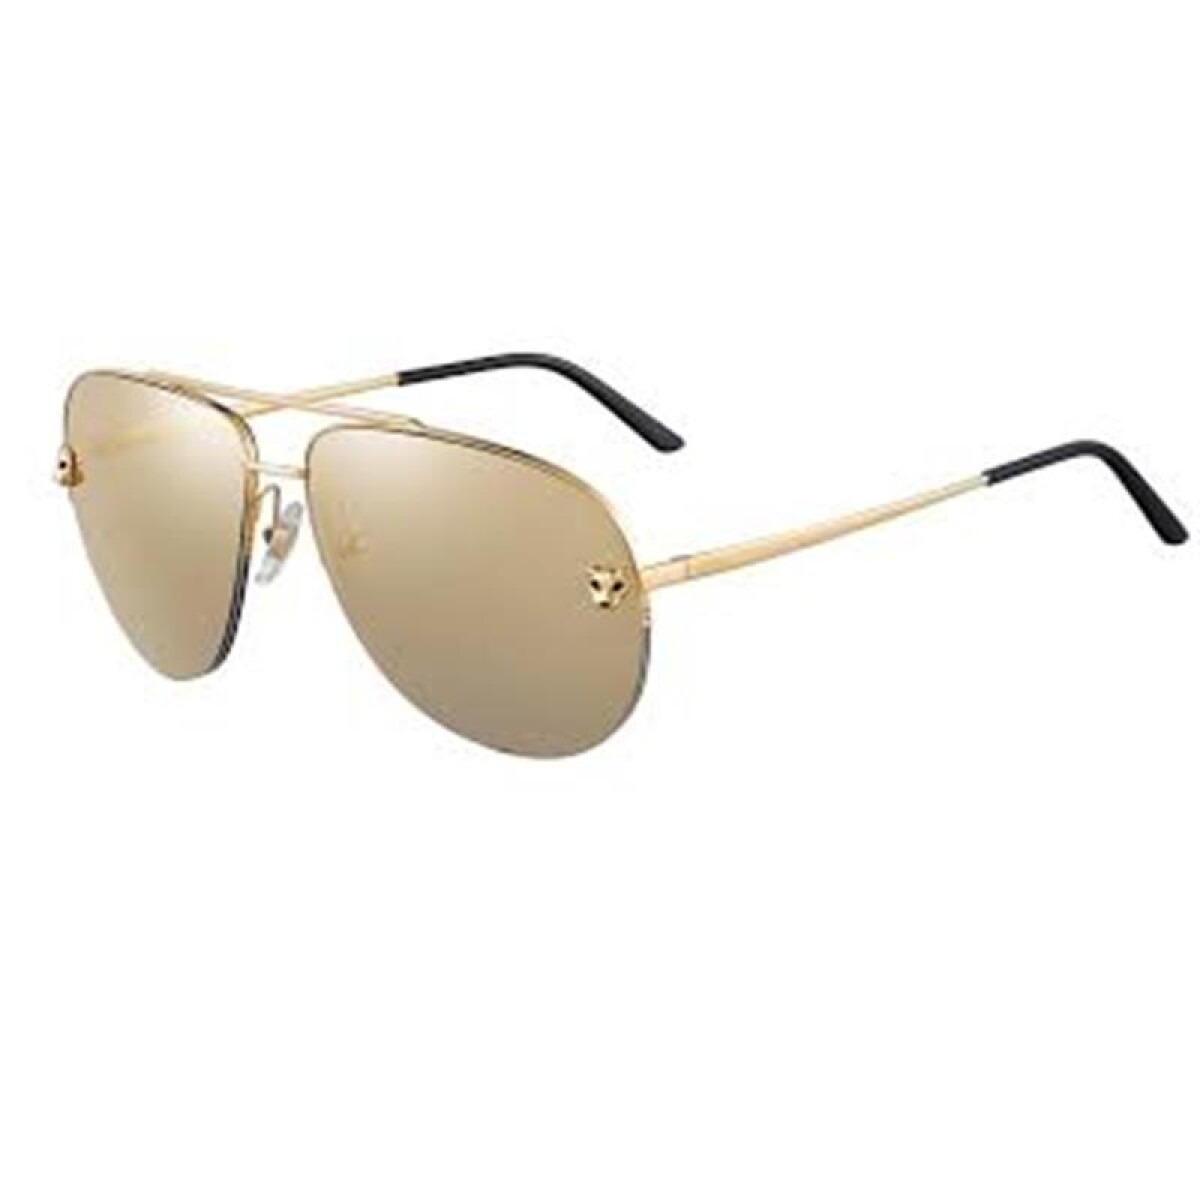 Cartier Esw00094 - Panthere Pilote - B34a24k 